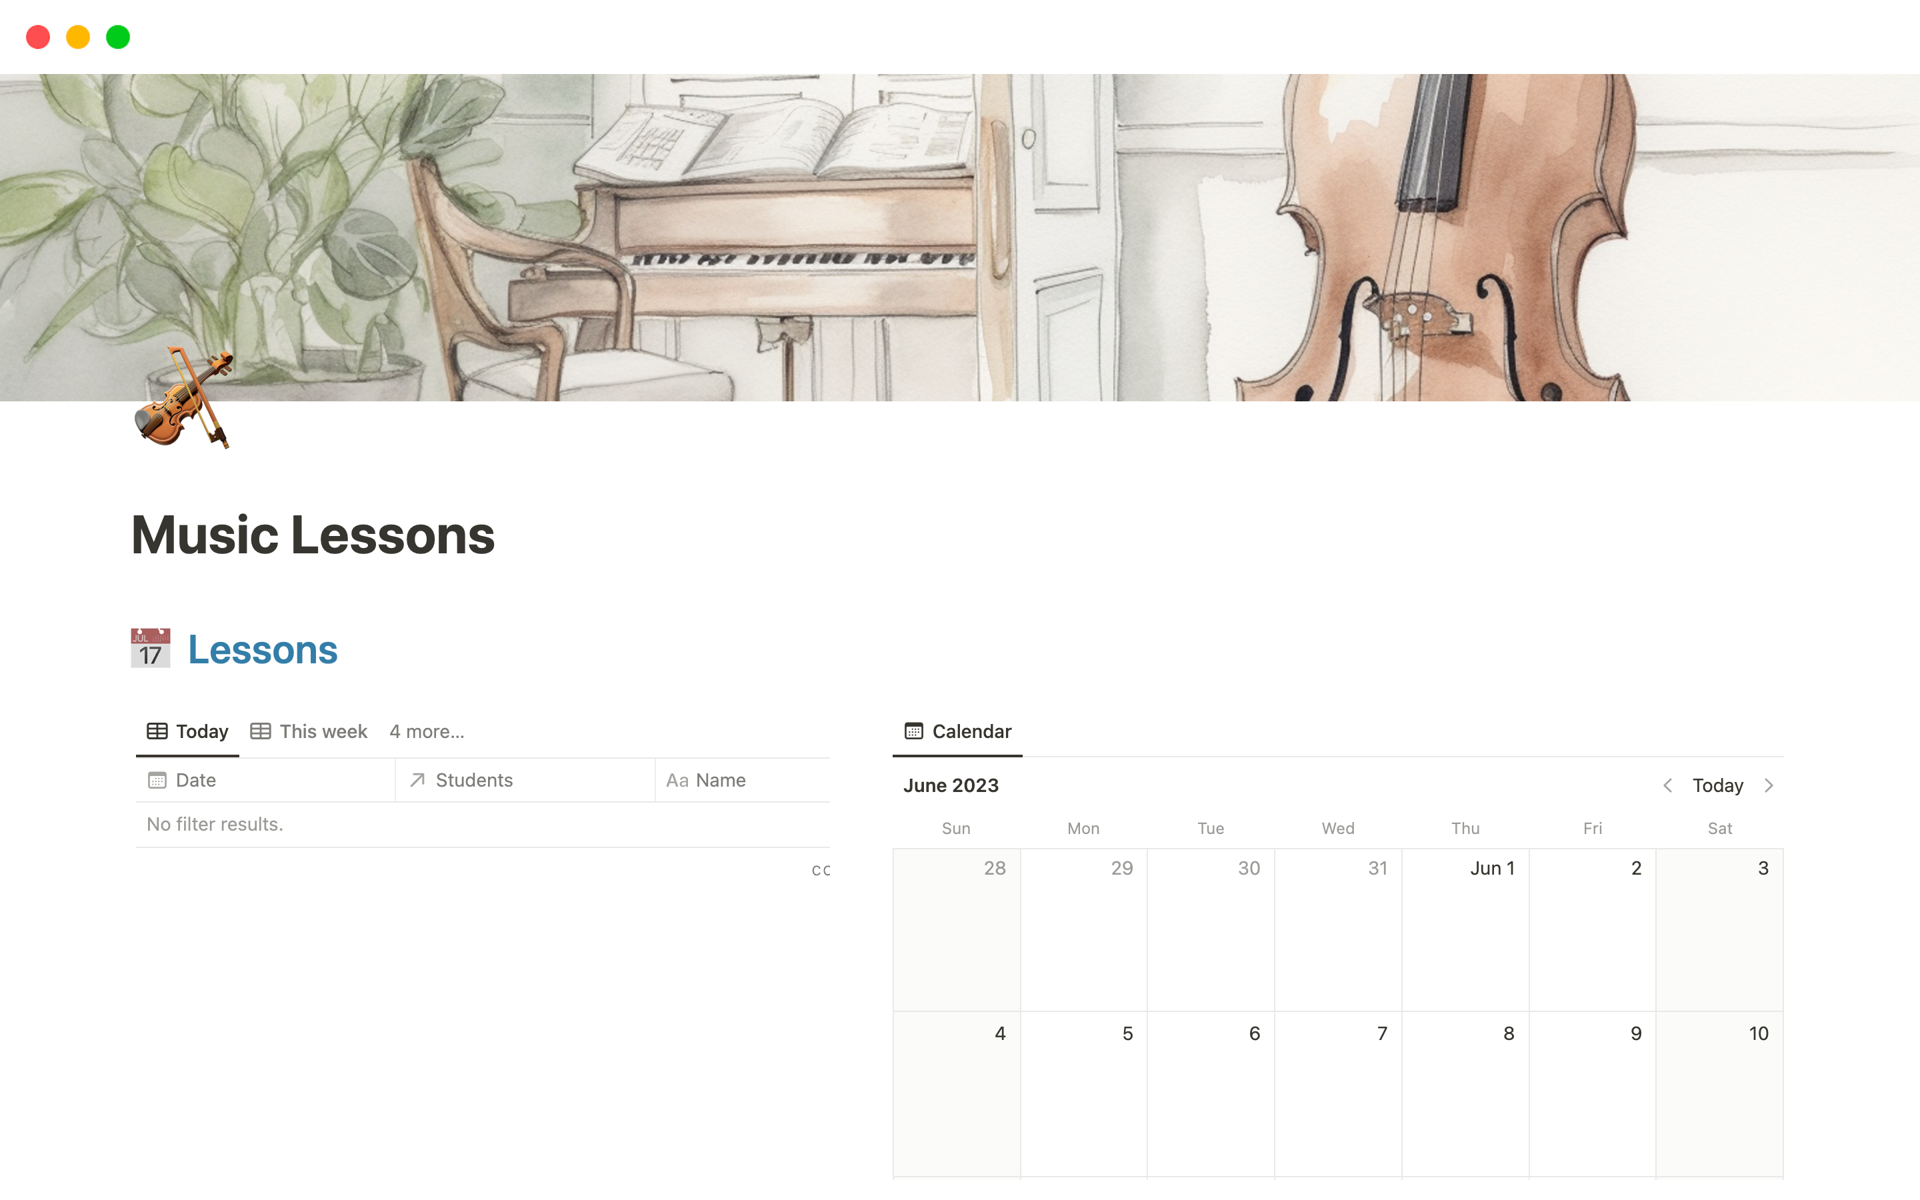 Track your music students, upcoming lessons, and invoices.